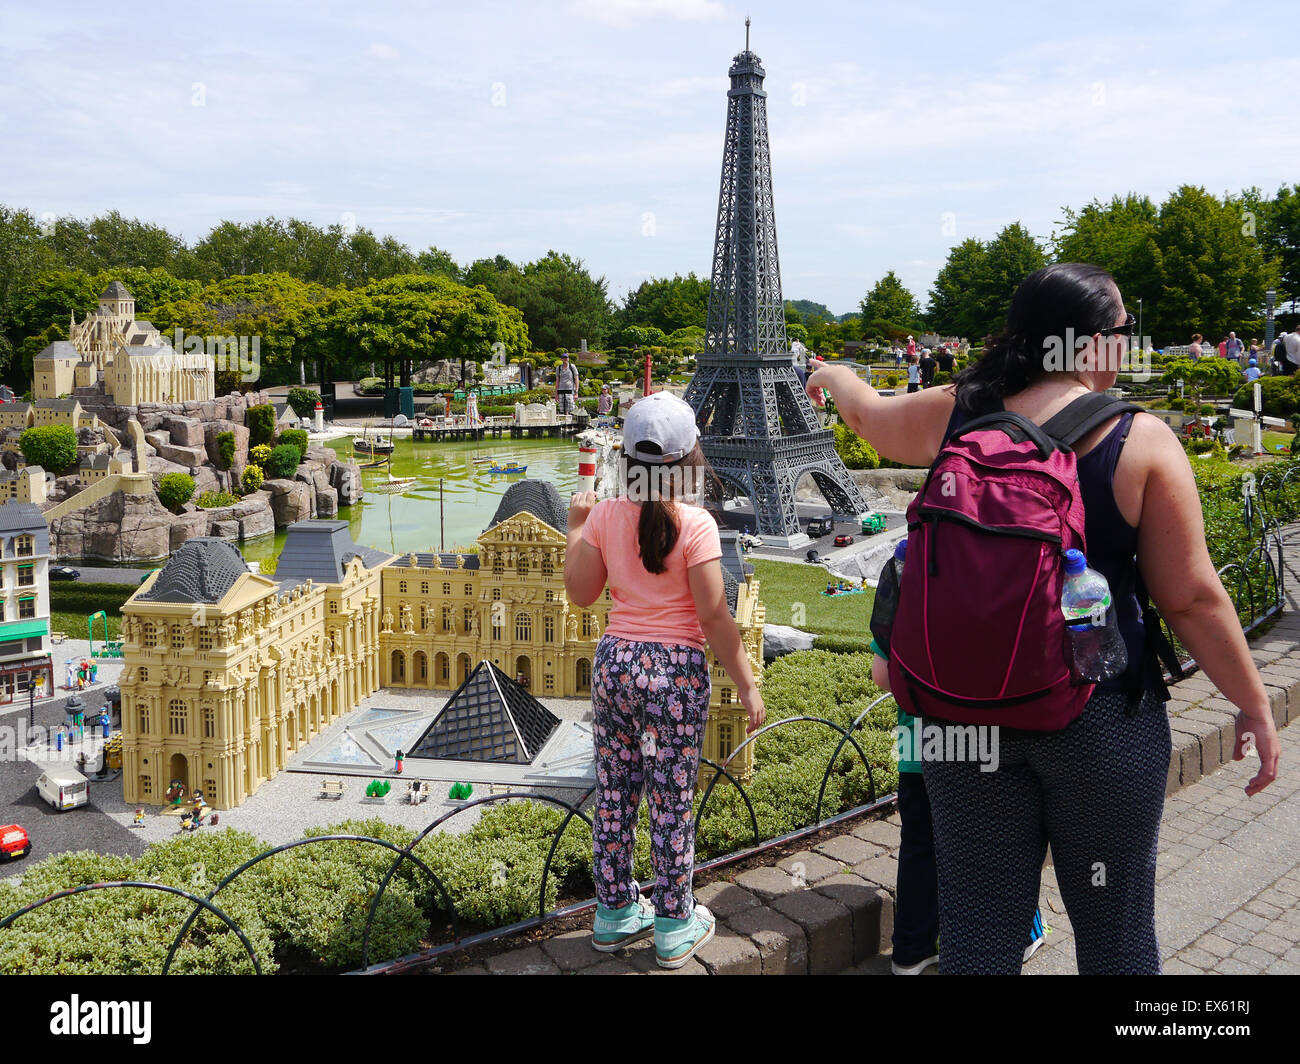 Visitors to Legoland Windsor admire the detailed models of famous landmarks from around the world made from Lego bricks. Stock Photo